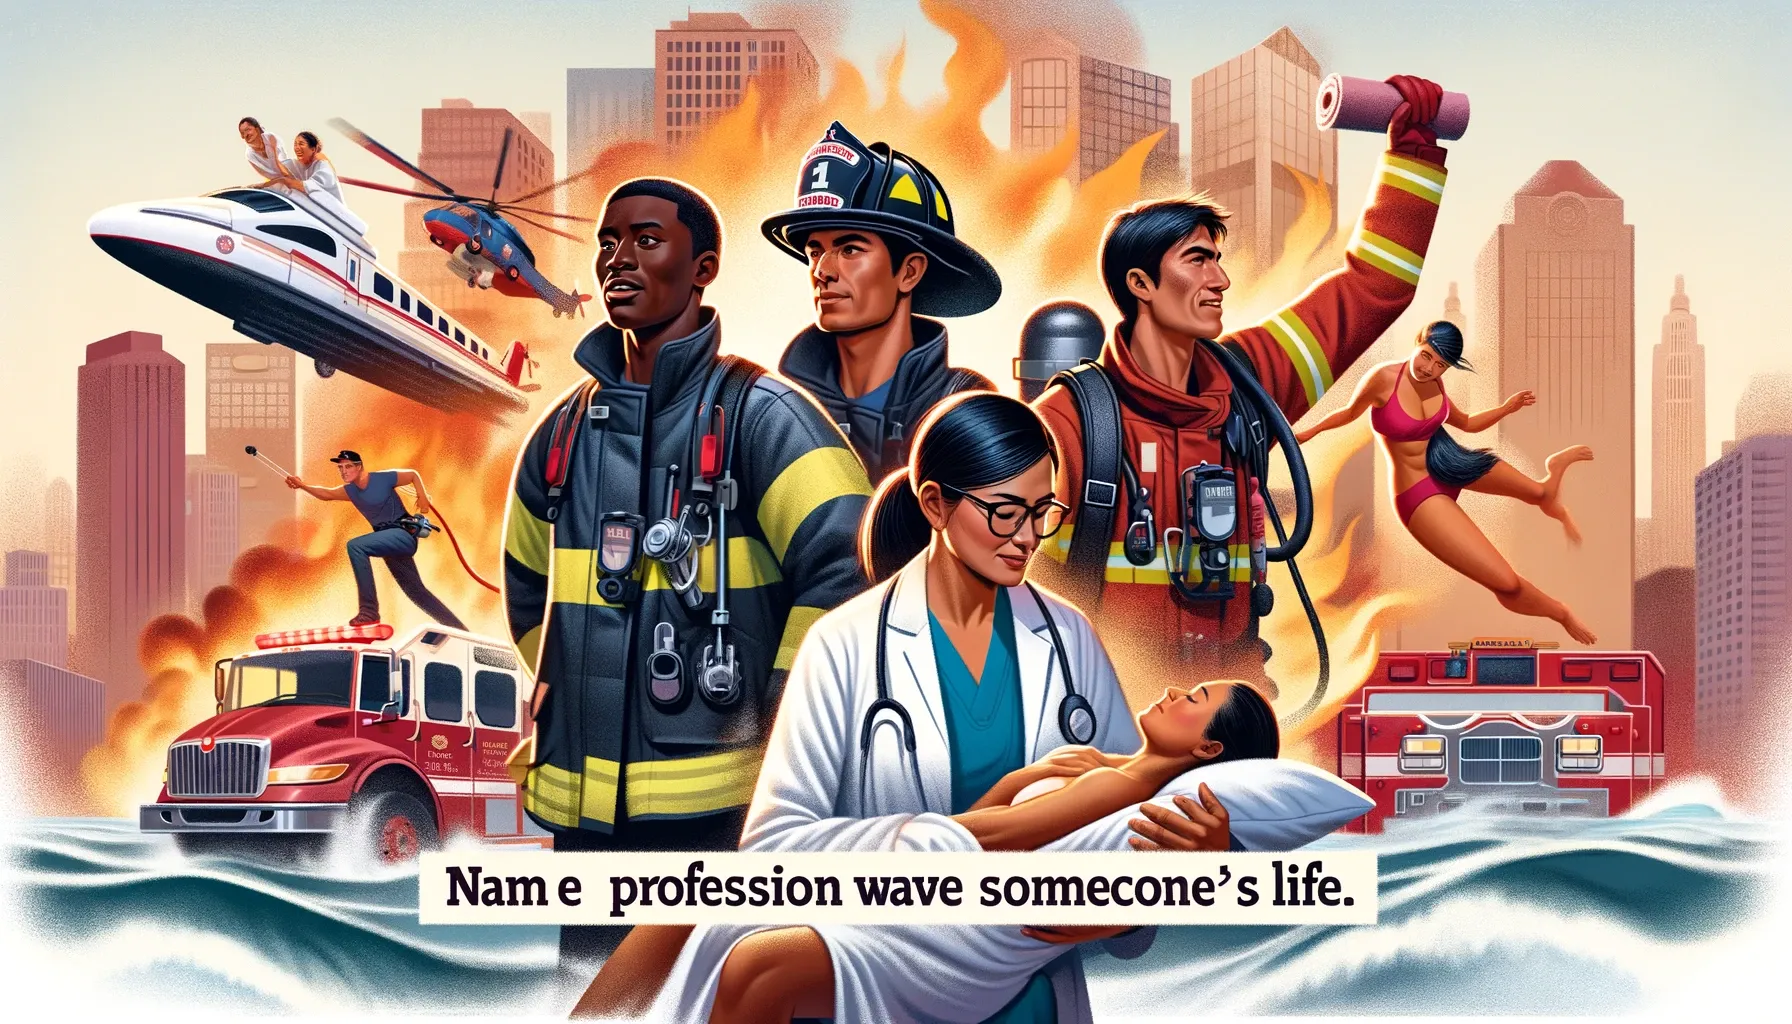 Name a Profession that Saves Lives